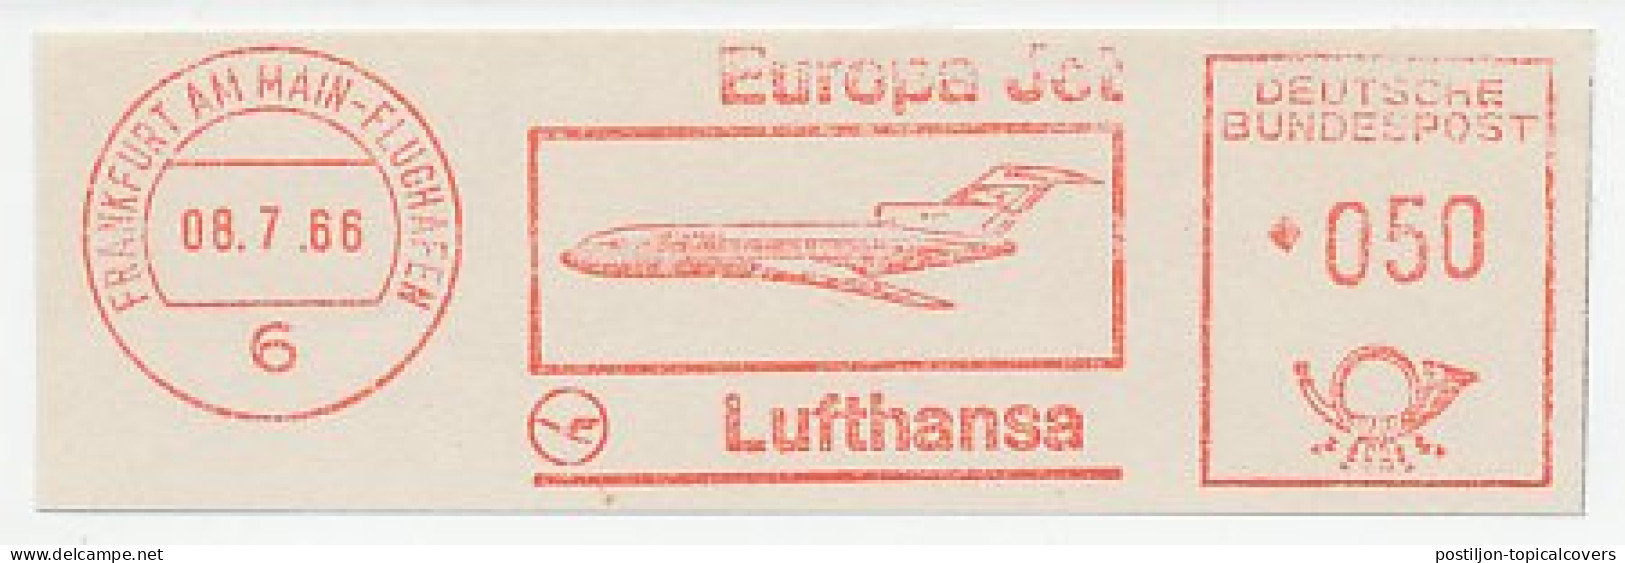 Meter Cut Germany 1966 Airline - Lufthansa - Europa Jet - Airplanes